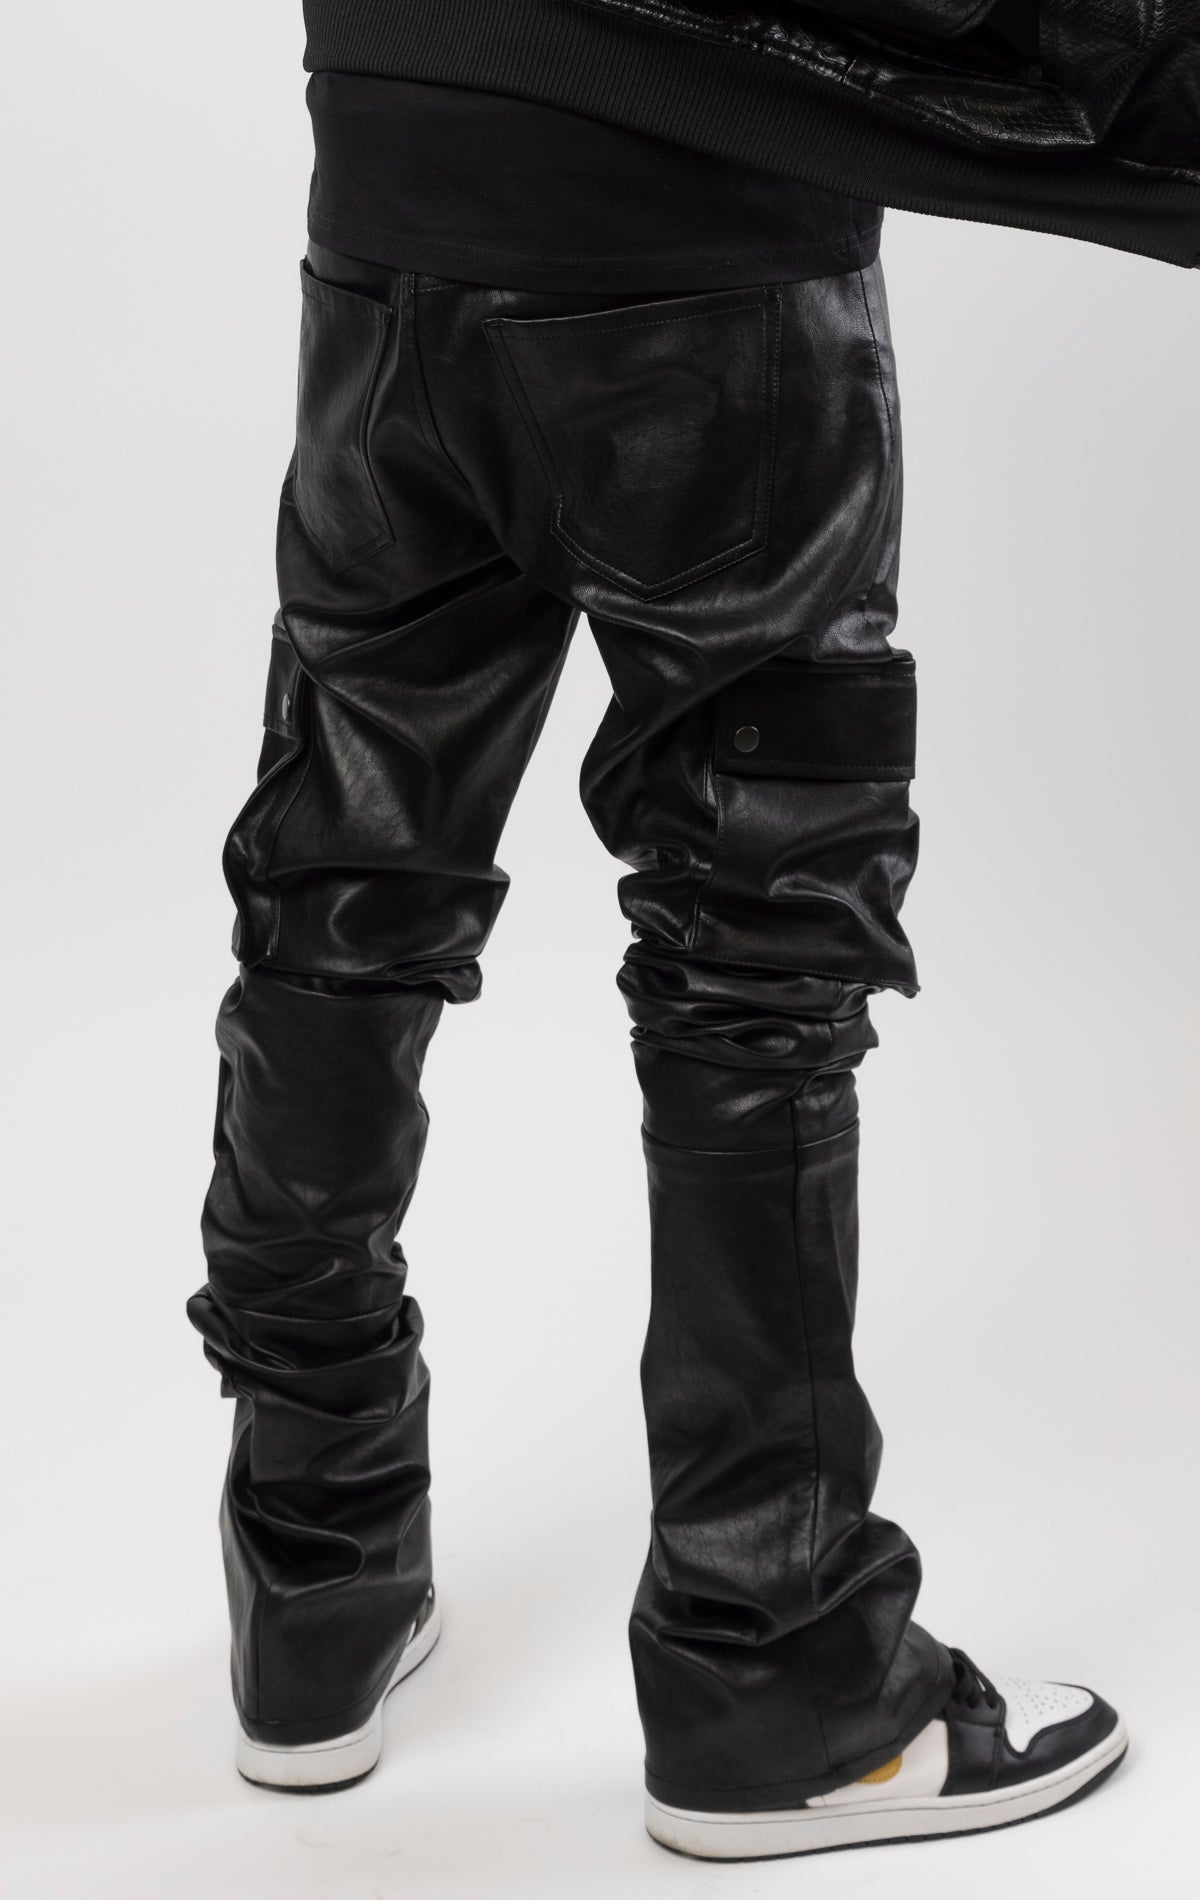 stacked Leather Doctrine Carter jeans with an extra-long inseam and flared leg opening, complete with side and back pockets.